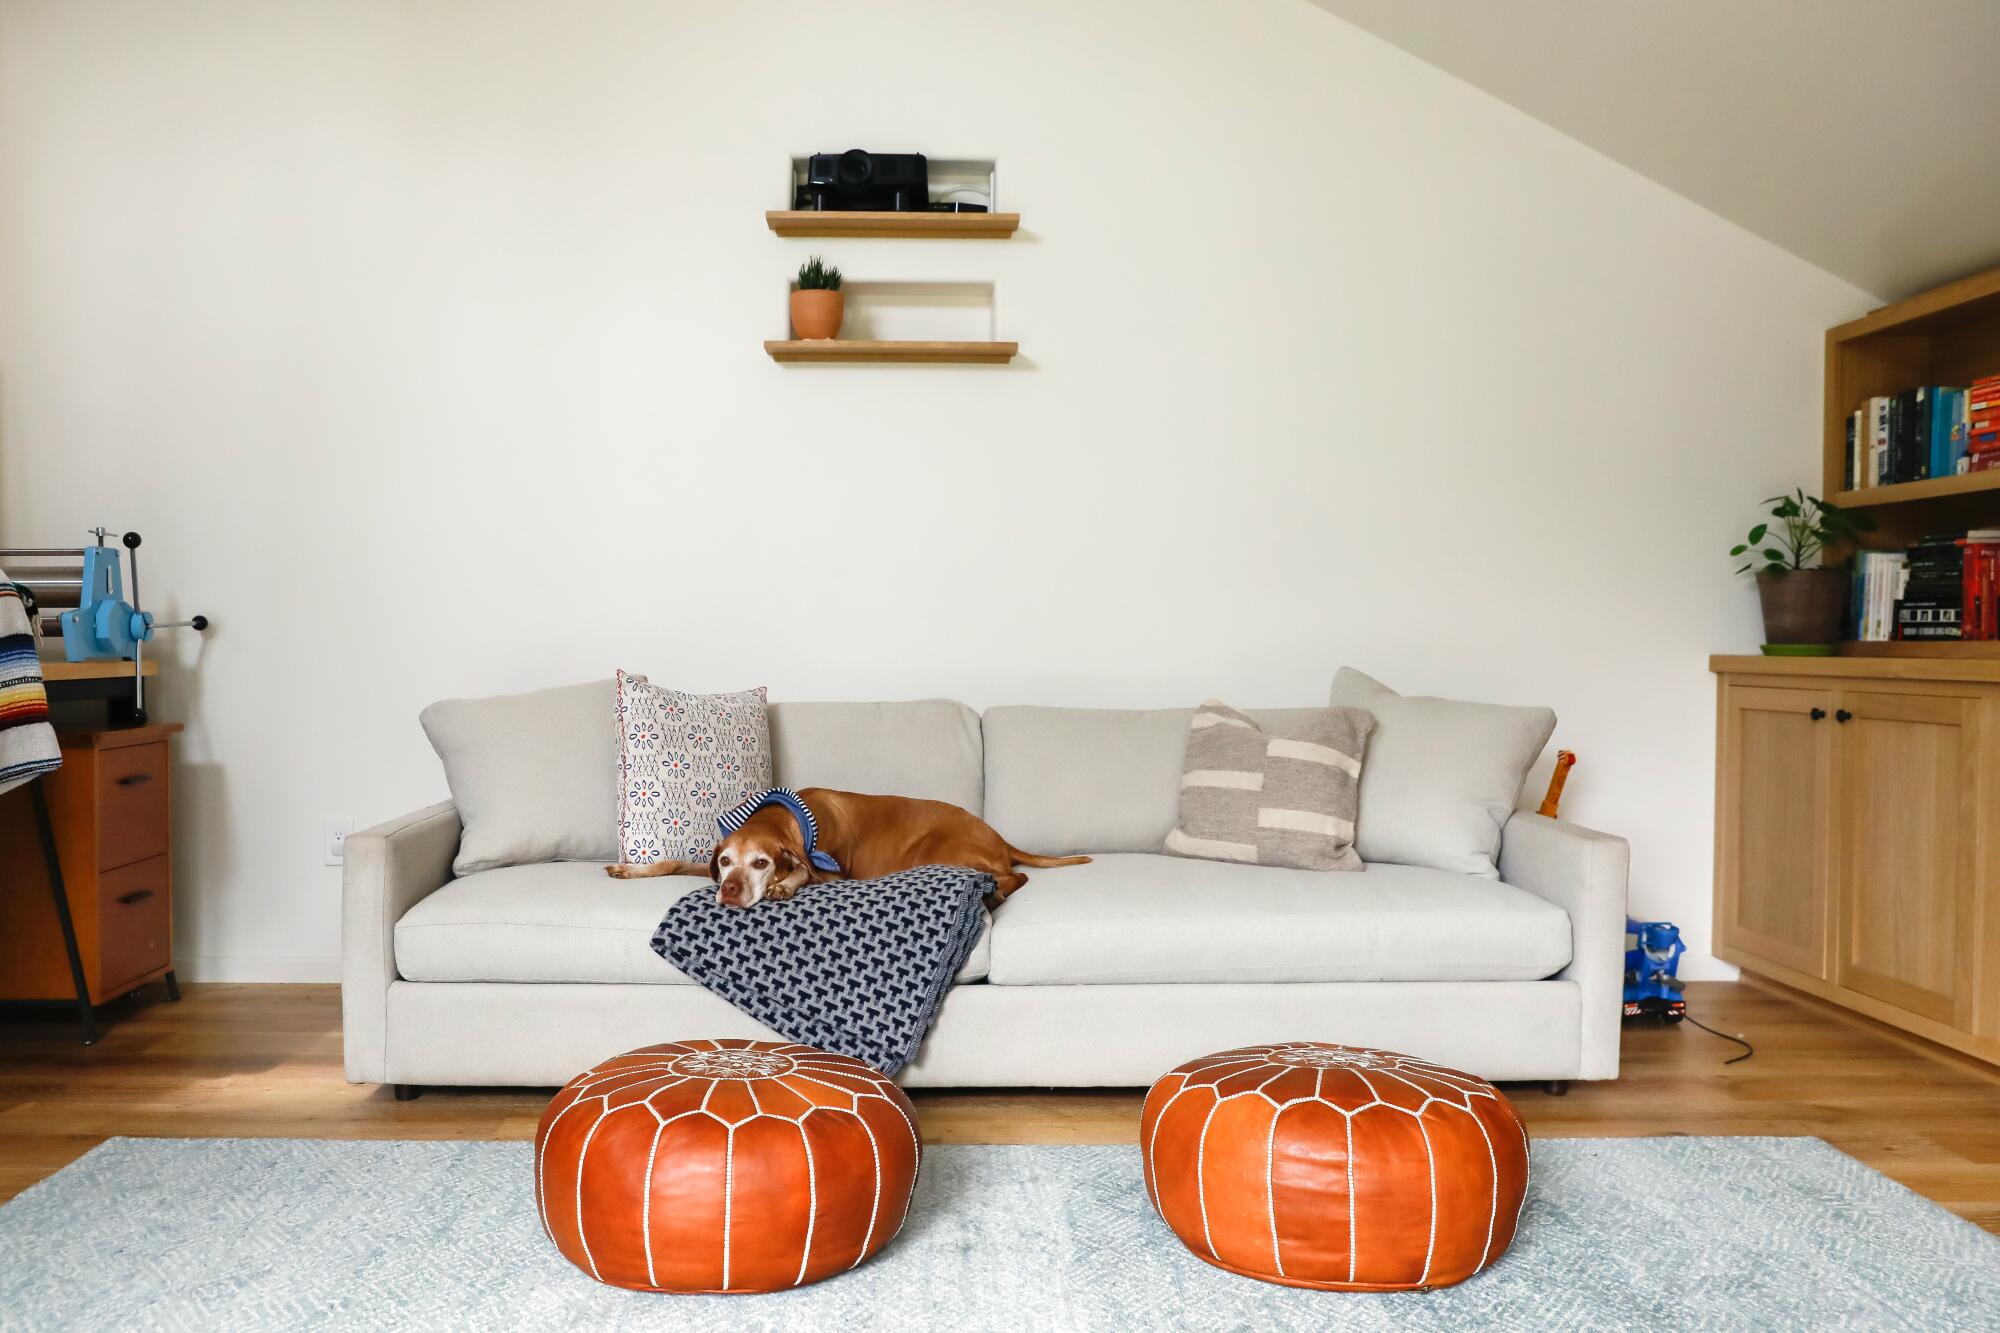 A dog rests on a blanket on a gray couch with two brown leather ottomans in front of it